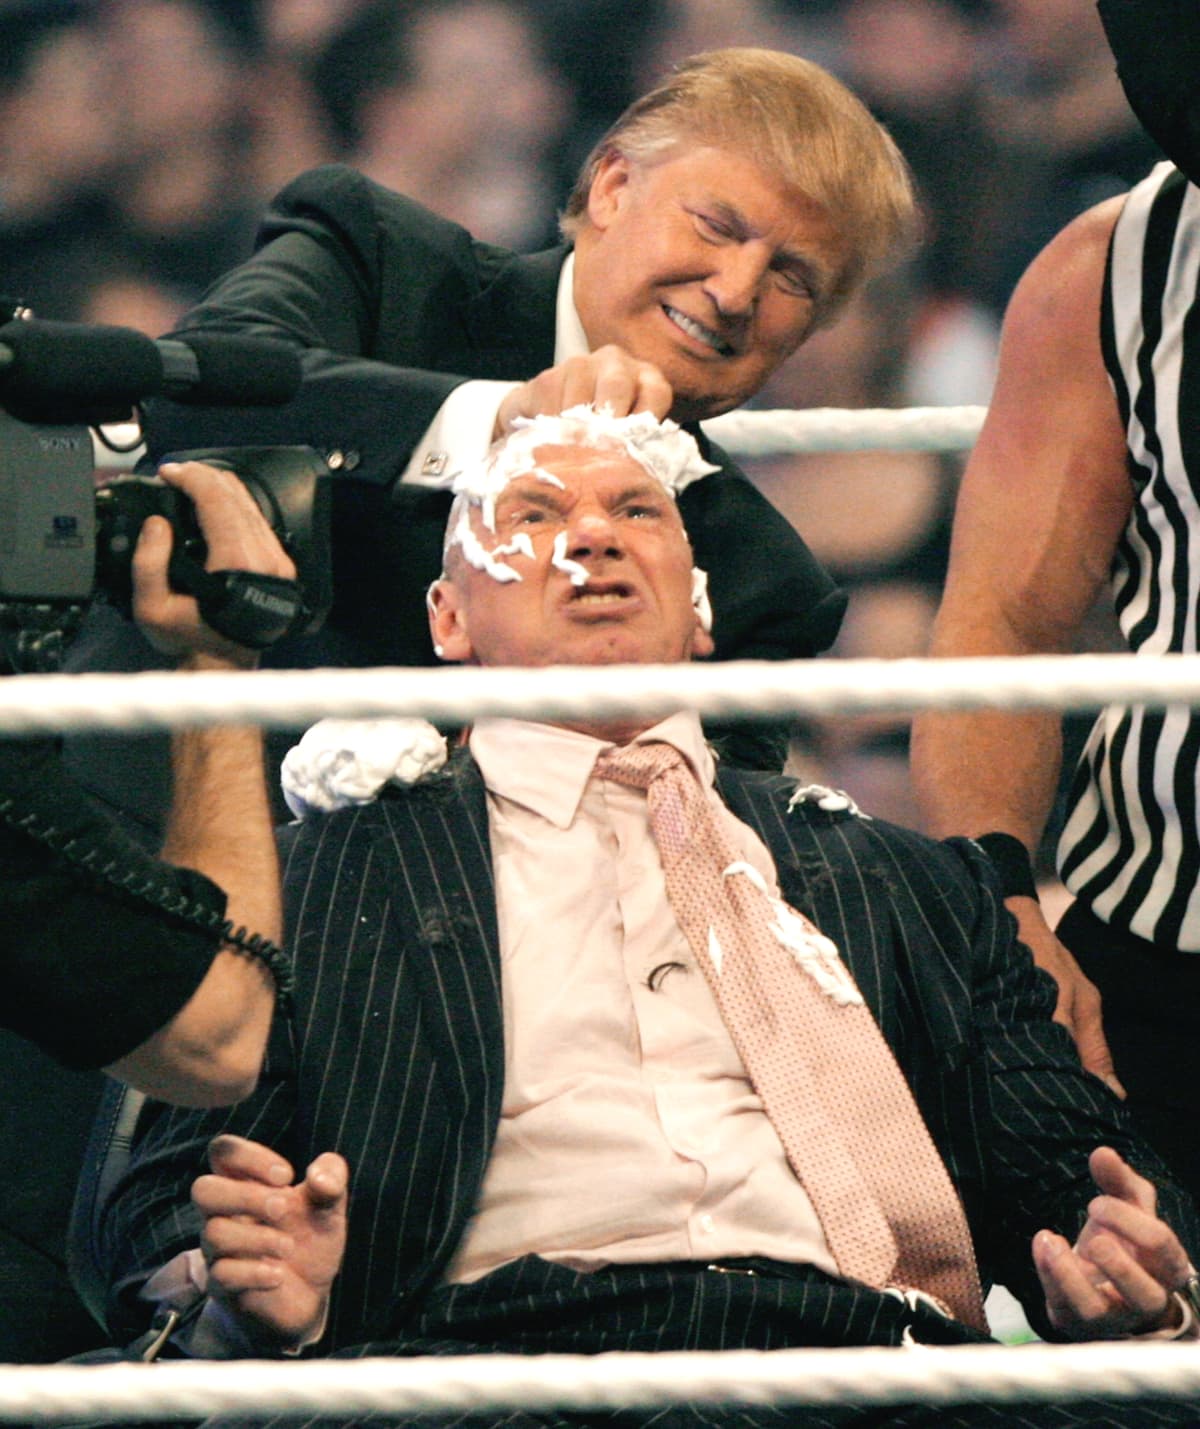 DETROIT - APRIL 1:  WWE chairman Vince McMahon (C) has his head shaved by Donald Trump after losing a bet in the Battle of the Billionaires at the 2007 World Wrestling Entertainment's Wrestlemania at Ford Field on April 1, 2007 in Detroit, Michigan. Umaga was representing McMahon in the match when he lost to Bobby Lashley who was representing Trump. (Photo by Bill Pugliano/Getty Images)